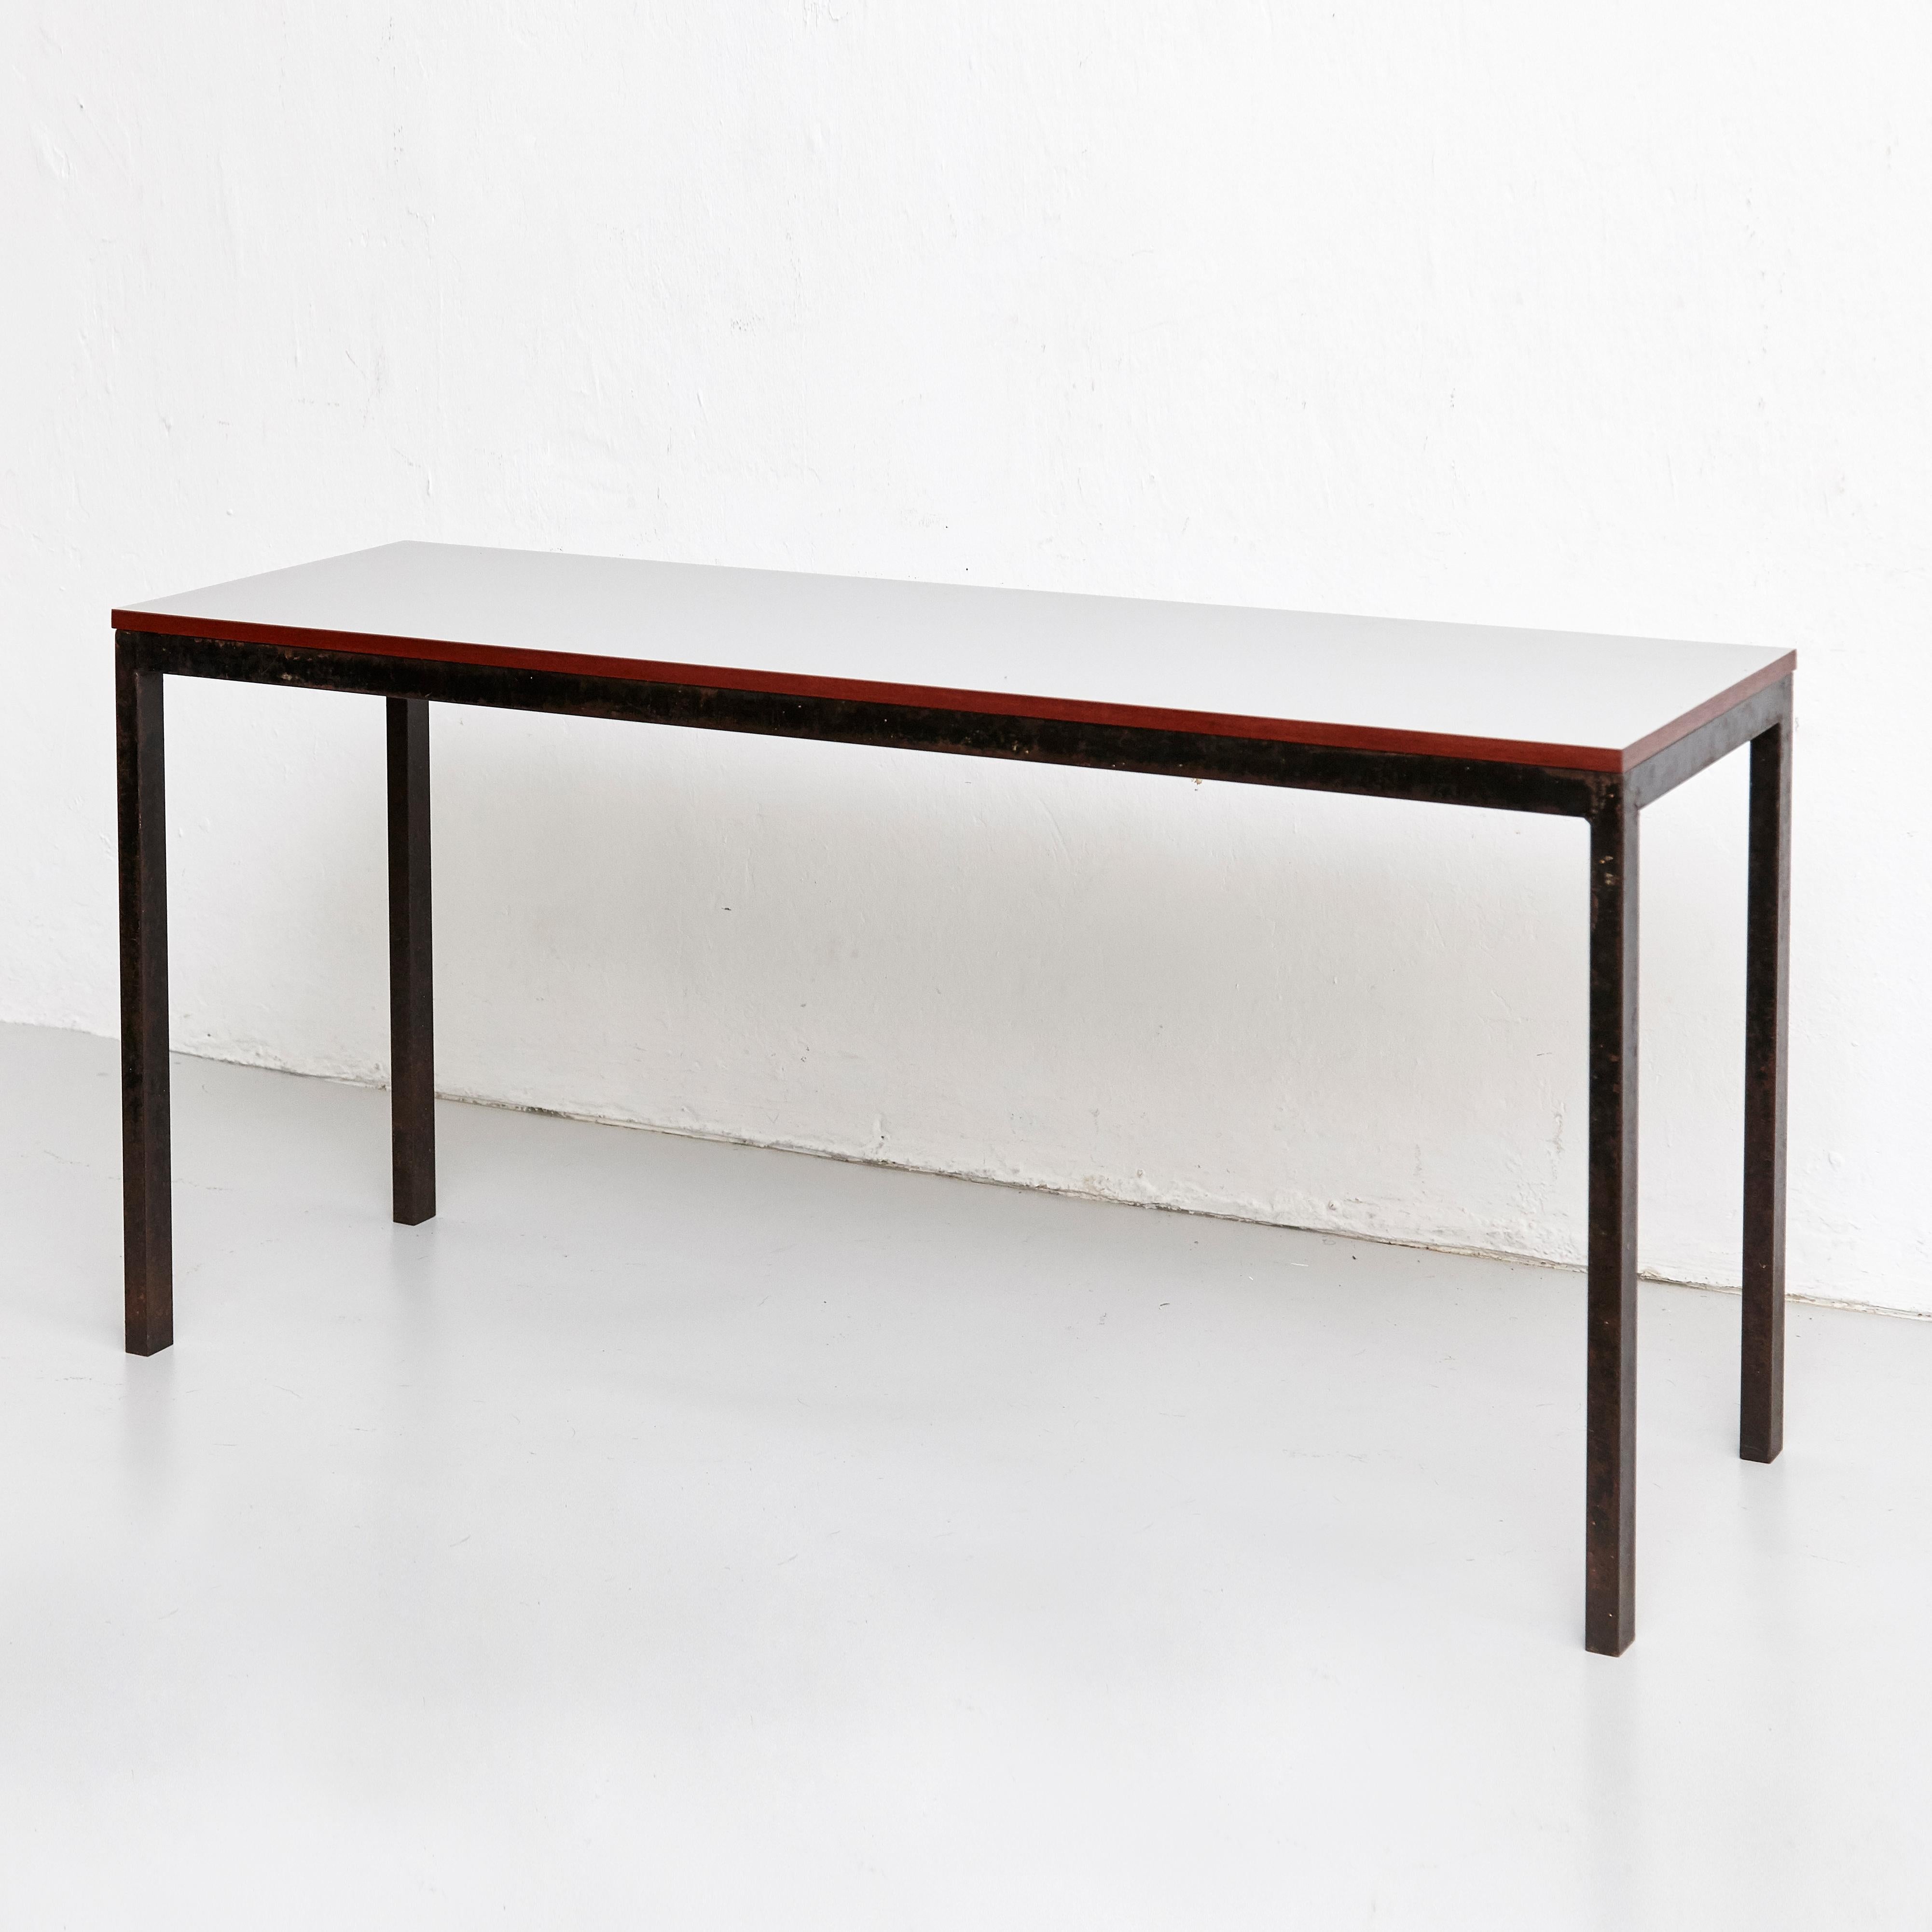 Console designed by Charlotte Perriand, circa 1950.
Manufactured in France, circa 1950.

Drawer moulded with Modele Charlotte Perriand or Brevete S.G.D.G.
Some break in the drawer as shown in the photo.

Grey laminated plastic-covered plywood,